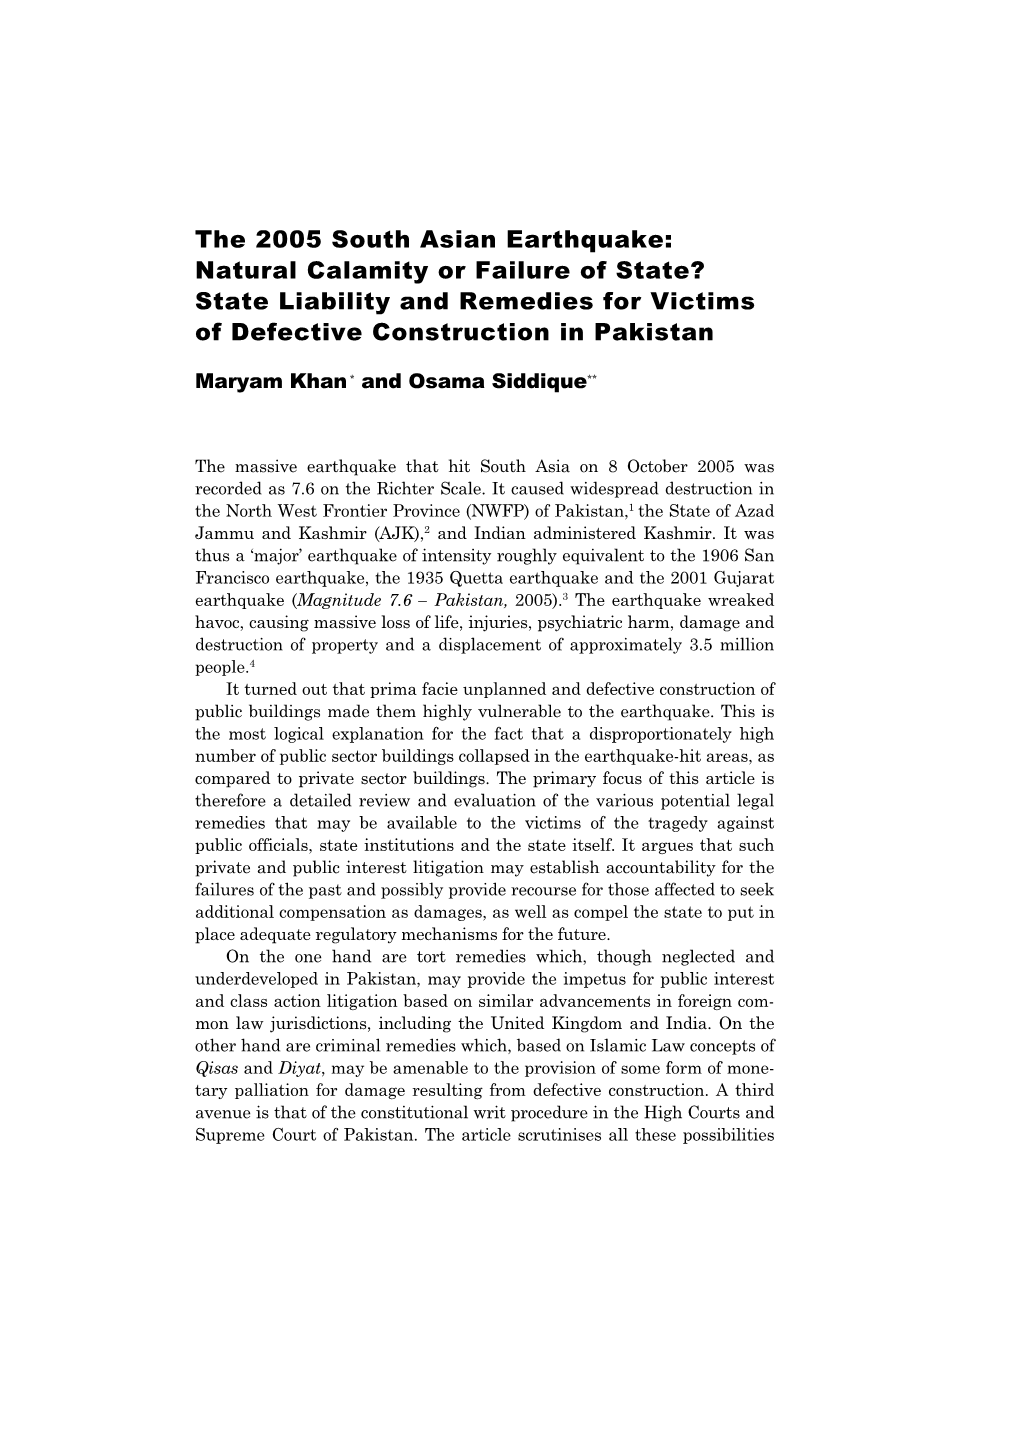 The 2005 South Asian Earthquake: Natural Calamity Or Failure of State? State Liability and Remedies for Victims of Defective Construction in Pakistan